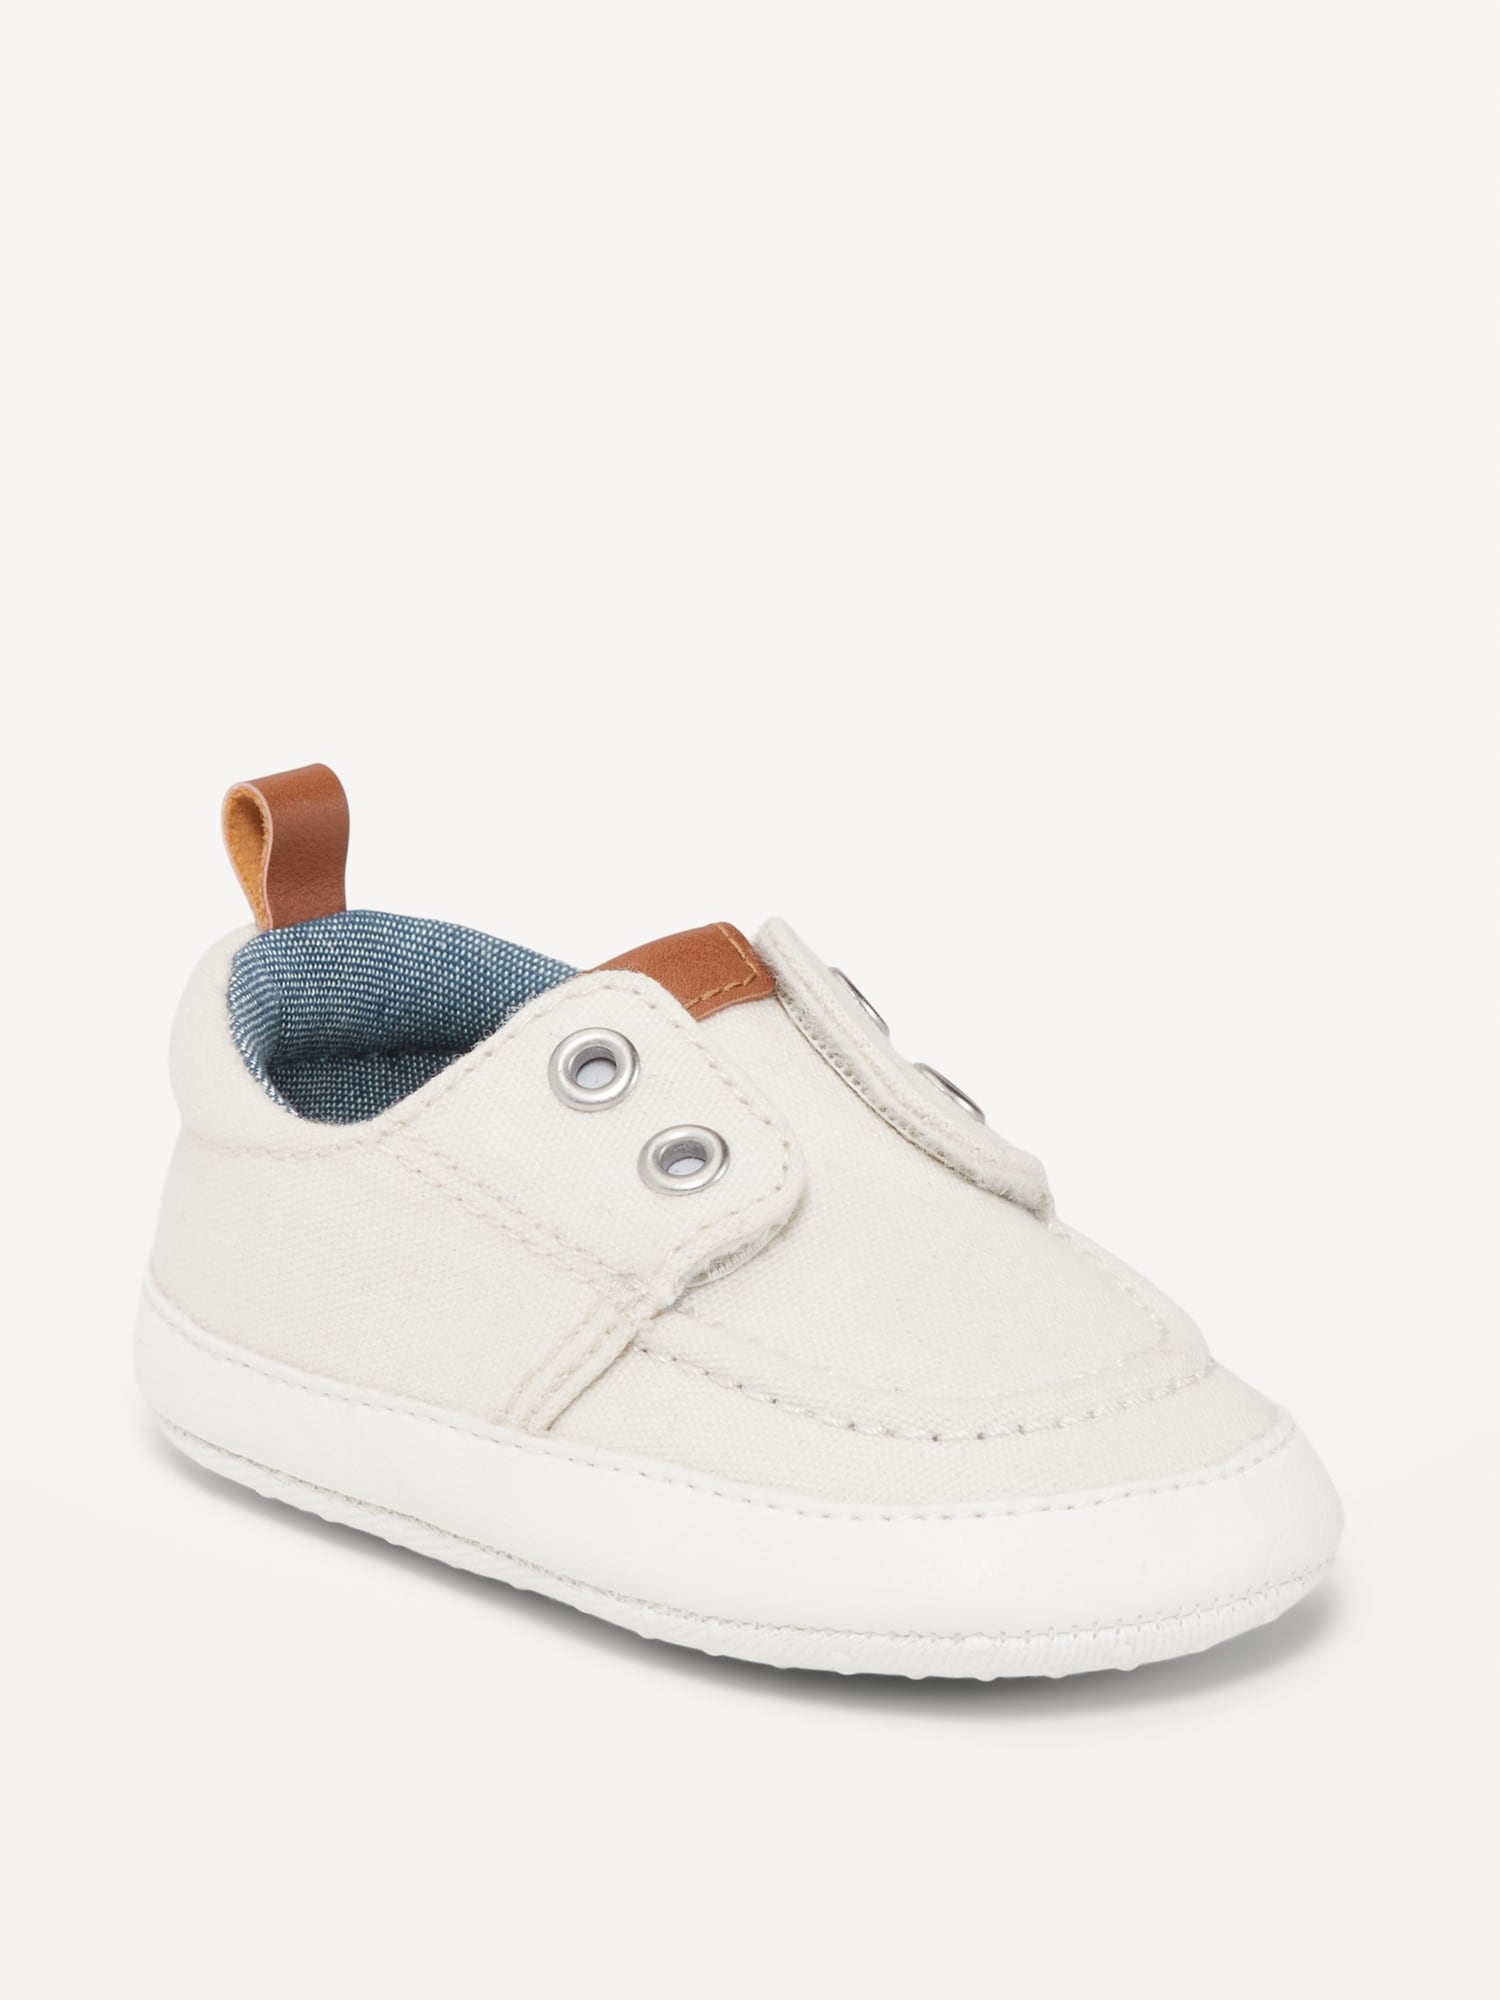 Old Navy Canvas Boat-Style Sneakers for Baby beige. 1